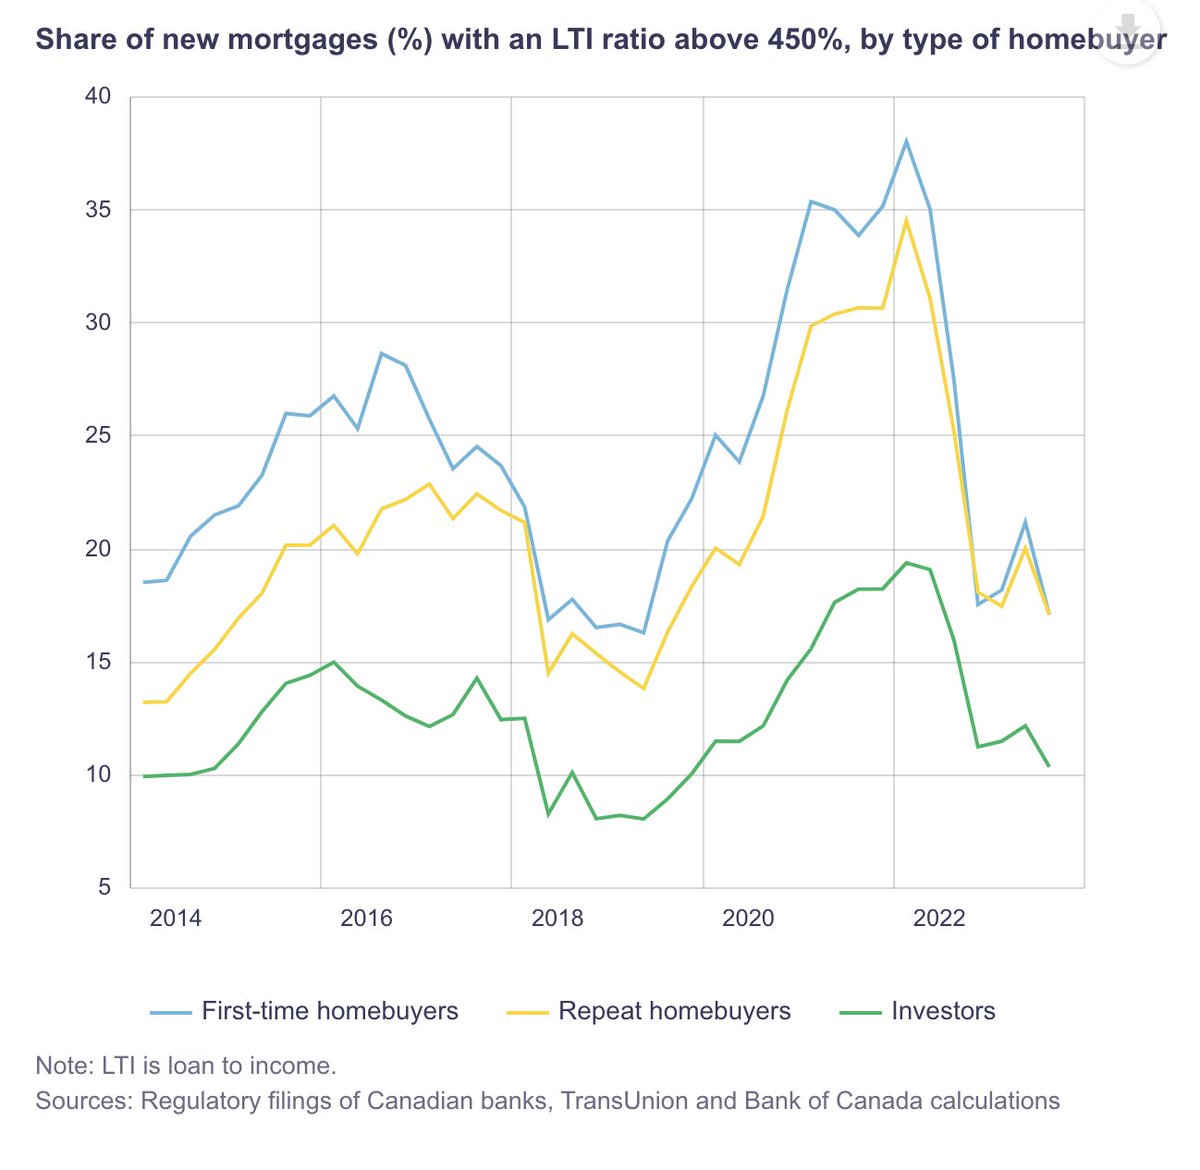 Monetary Policy has been pretty good at getting reducing mortgages above 4.5x income. OSFI plans to get each line in this this chart to 0 as rates come down. Pretty wild honestly.